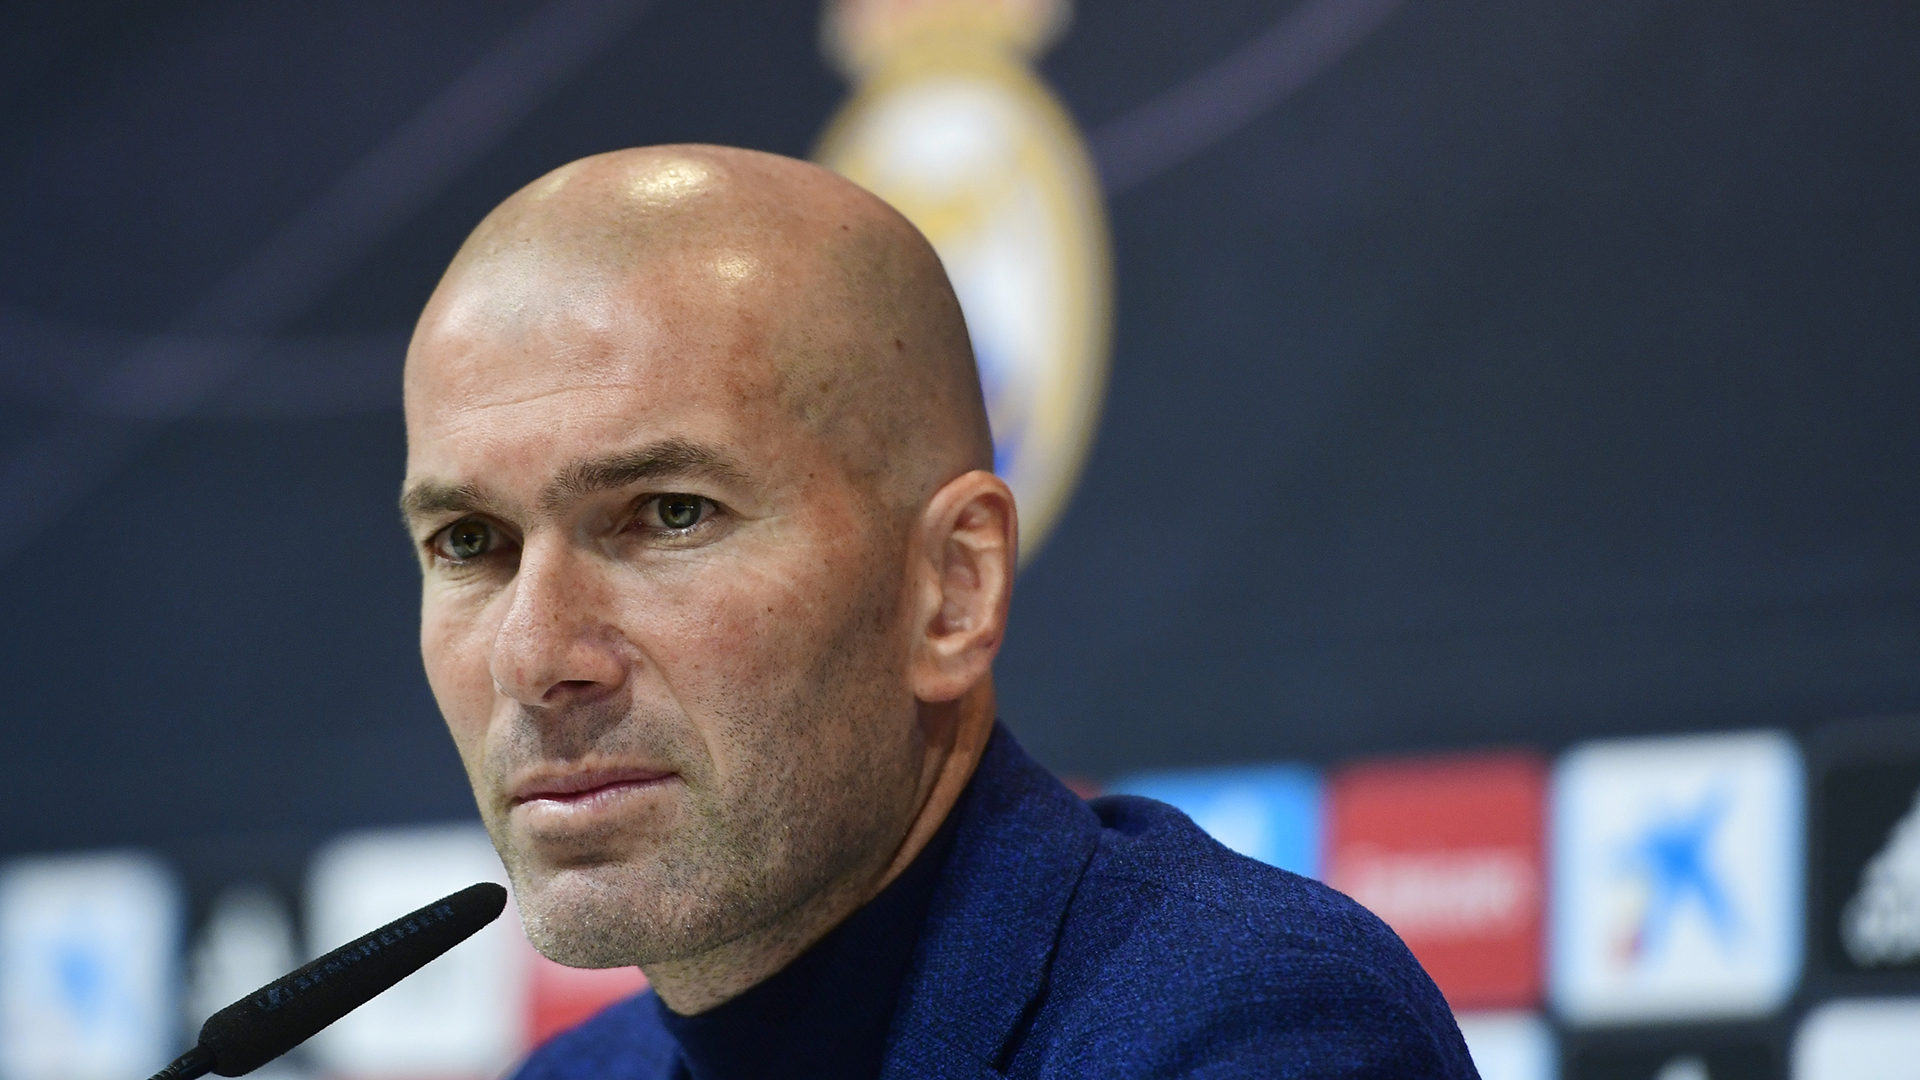 Zinedine Zidane re-appointed as Real Madrid’s new manager